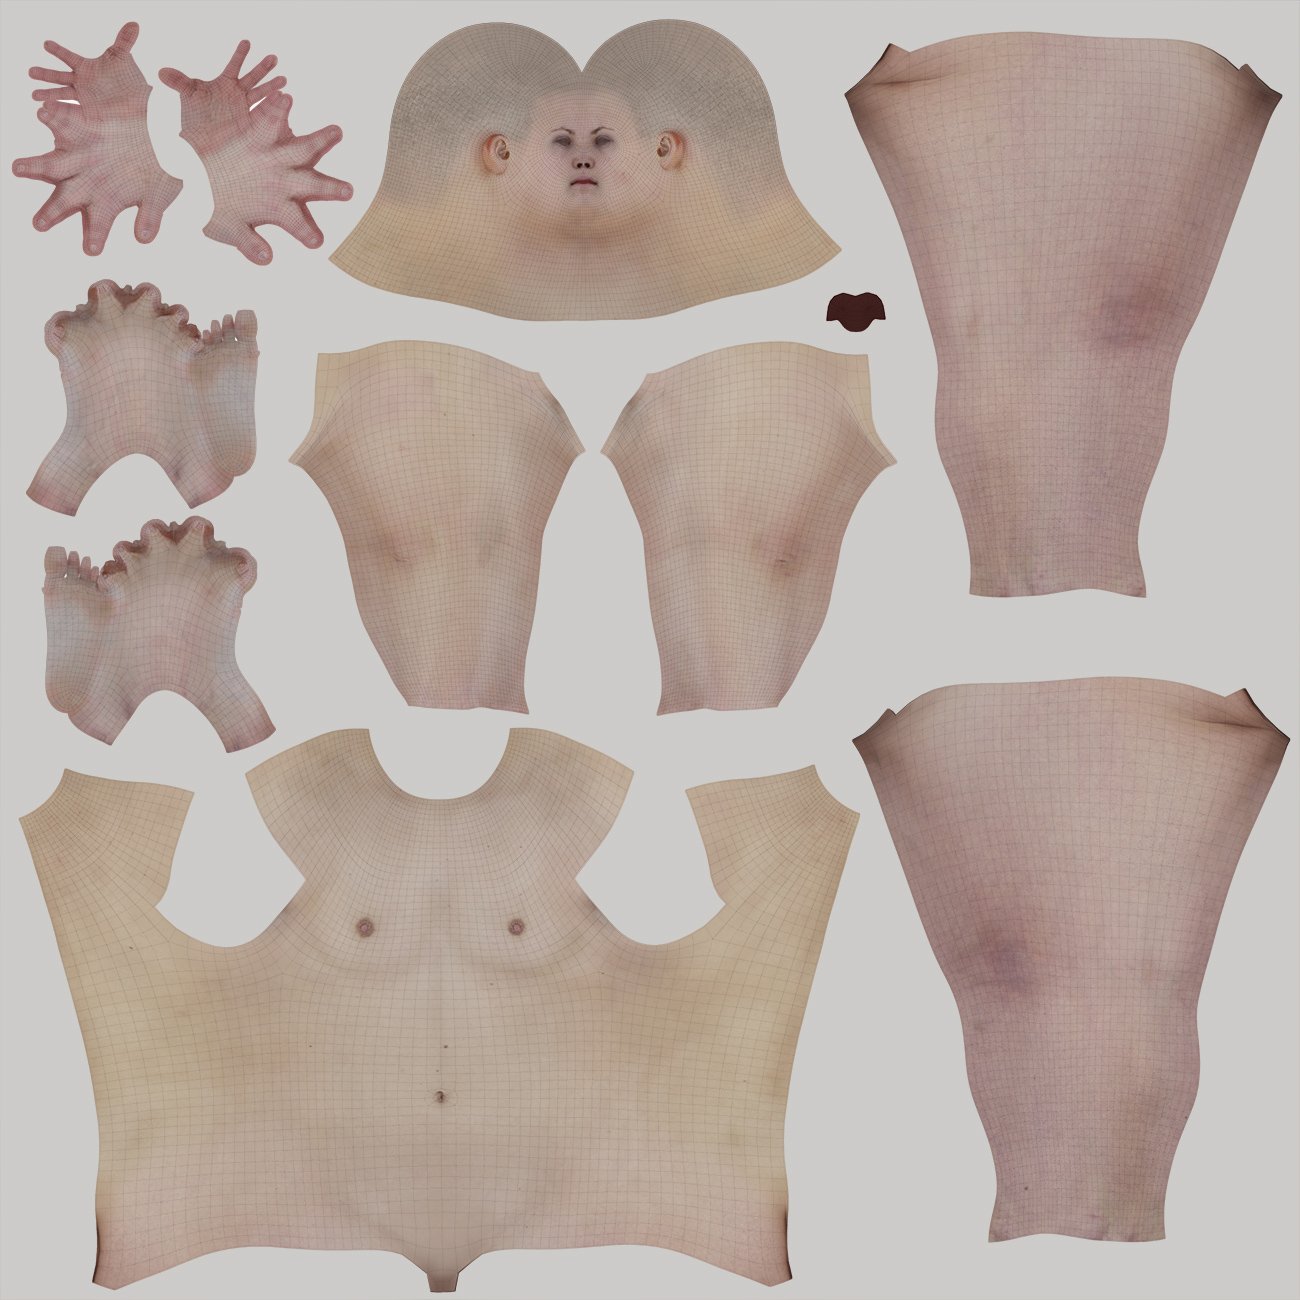 Female body texture map